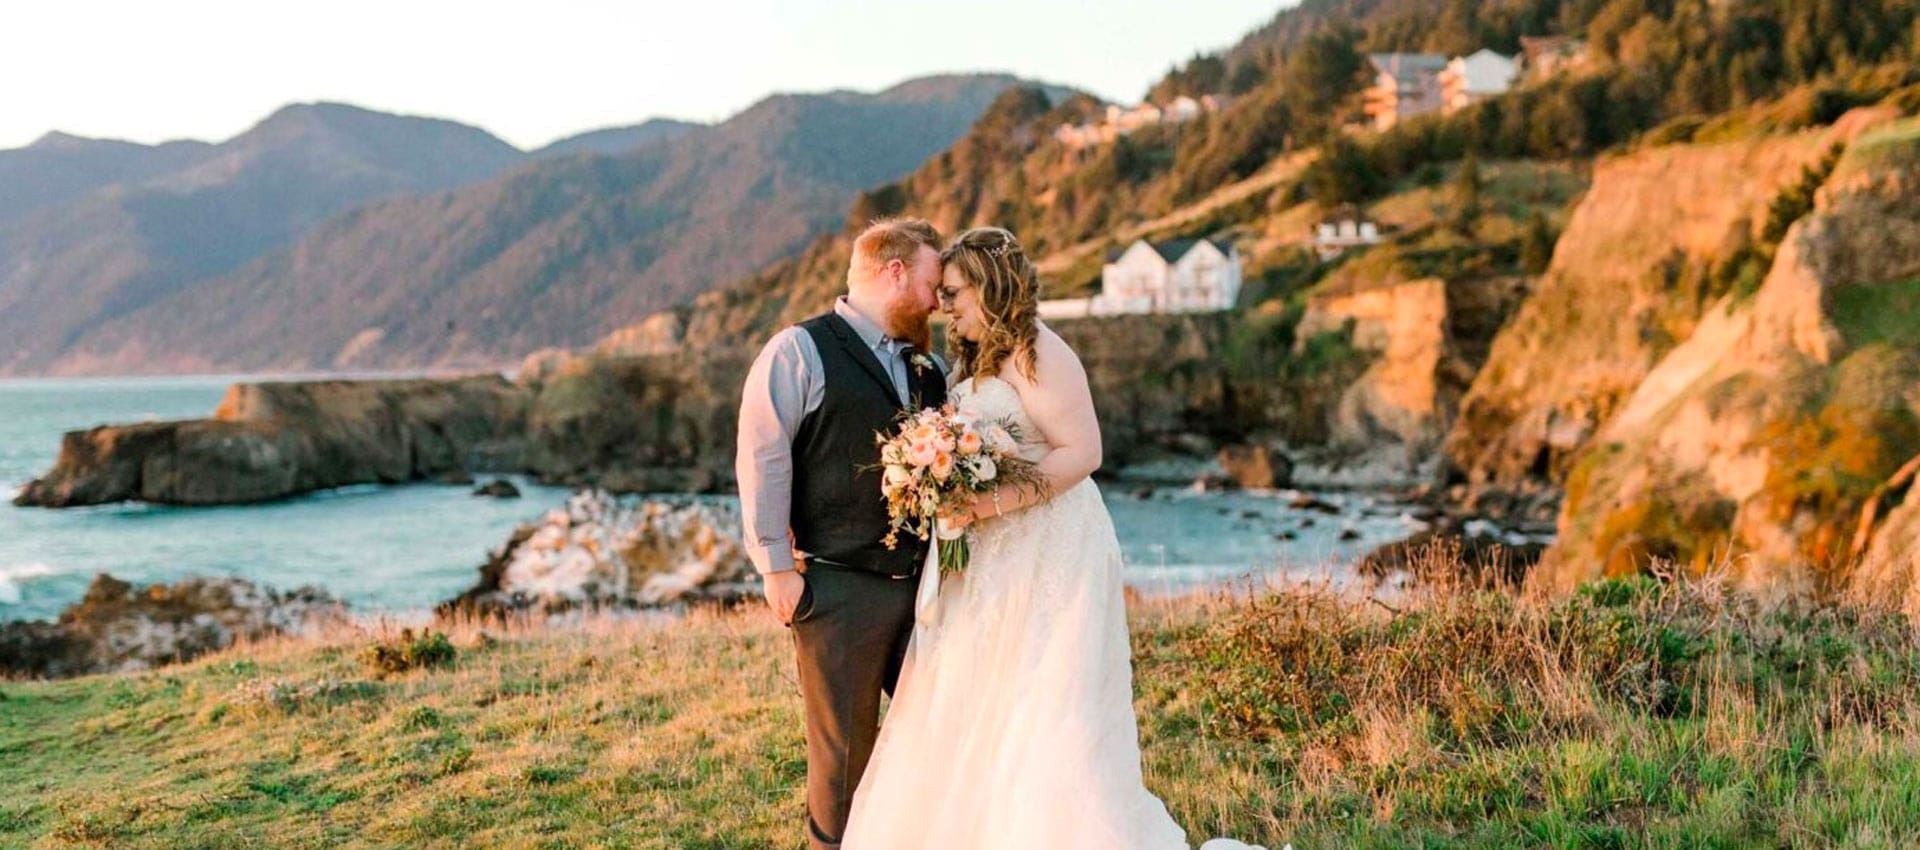 Shelter Cove Weddings - Northern California